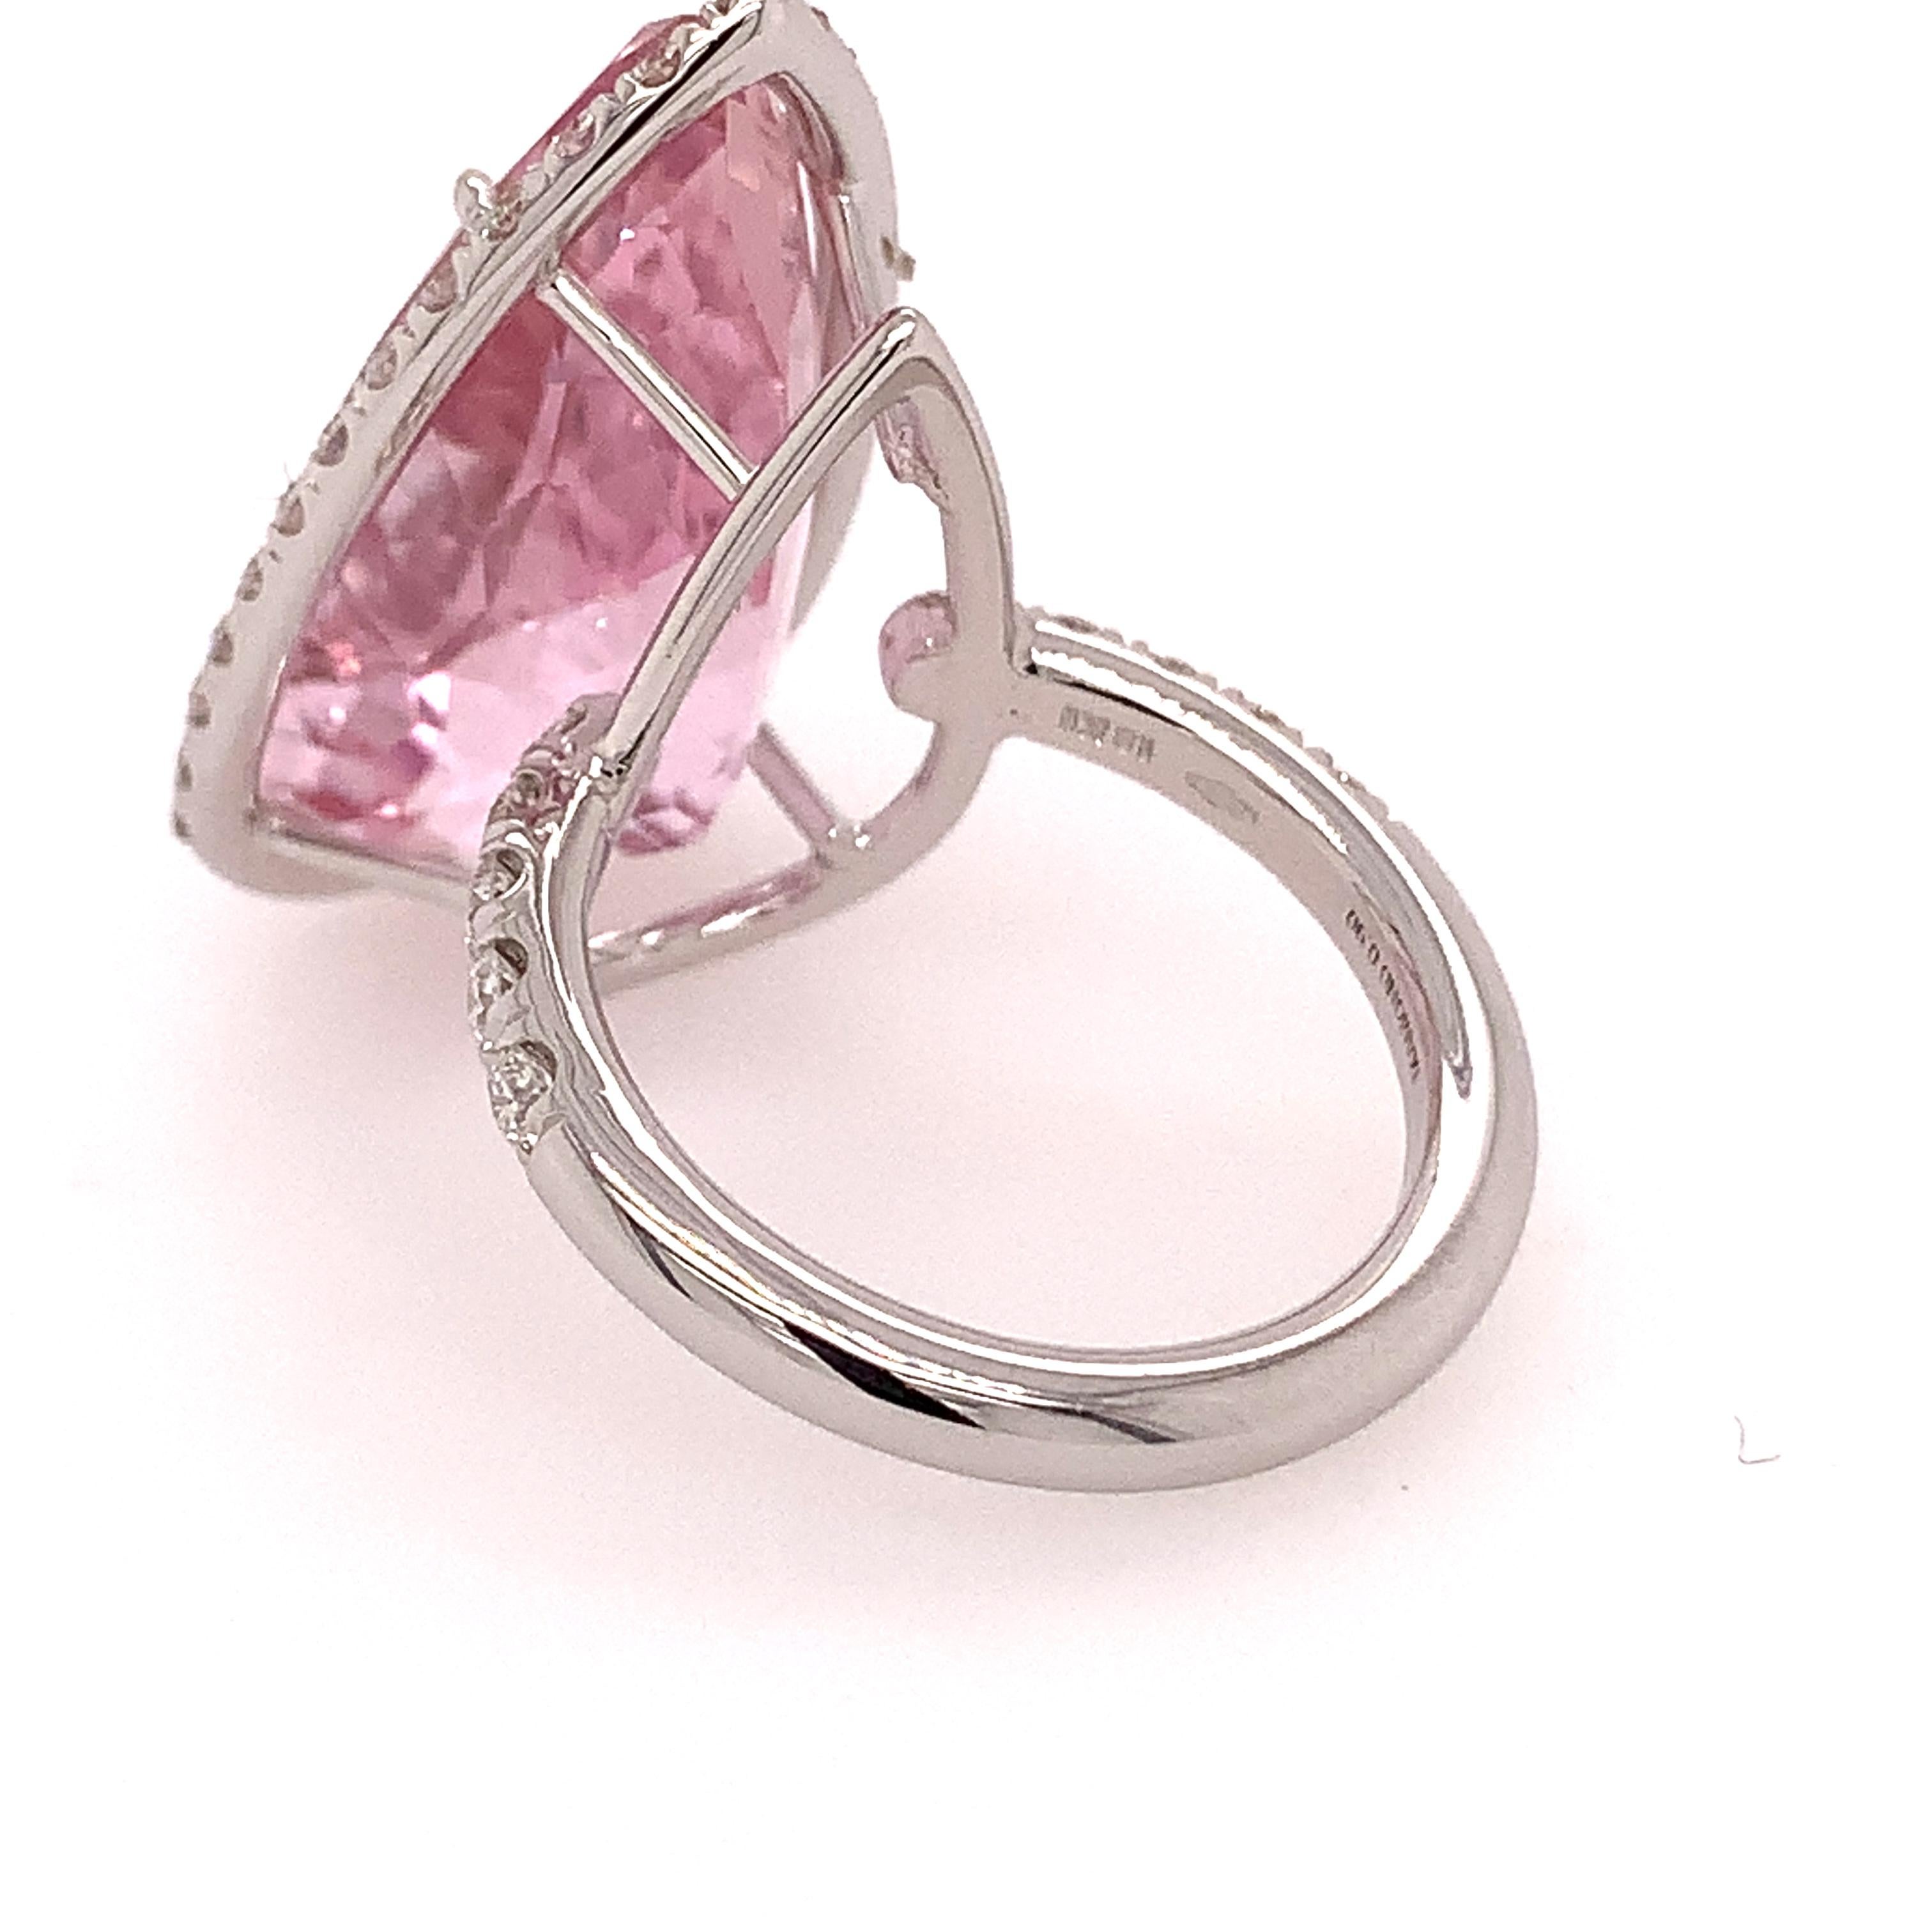 Modern 18kt White Gold One of a Kind Ring with 22, Ct Kunzite and Diamonds